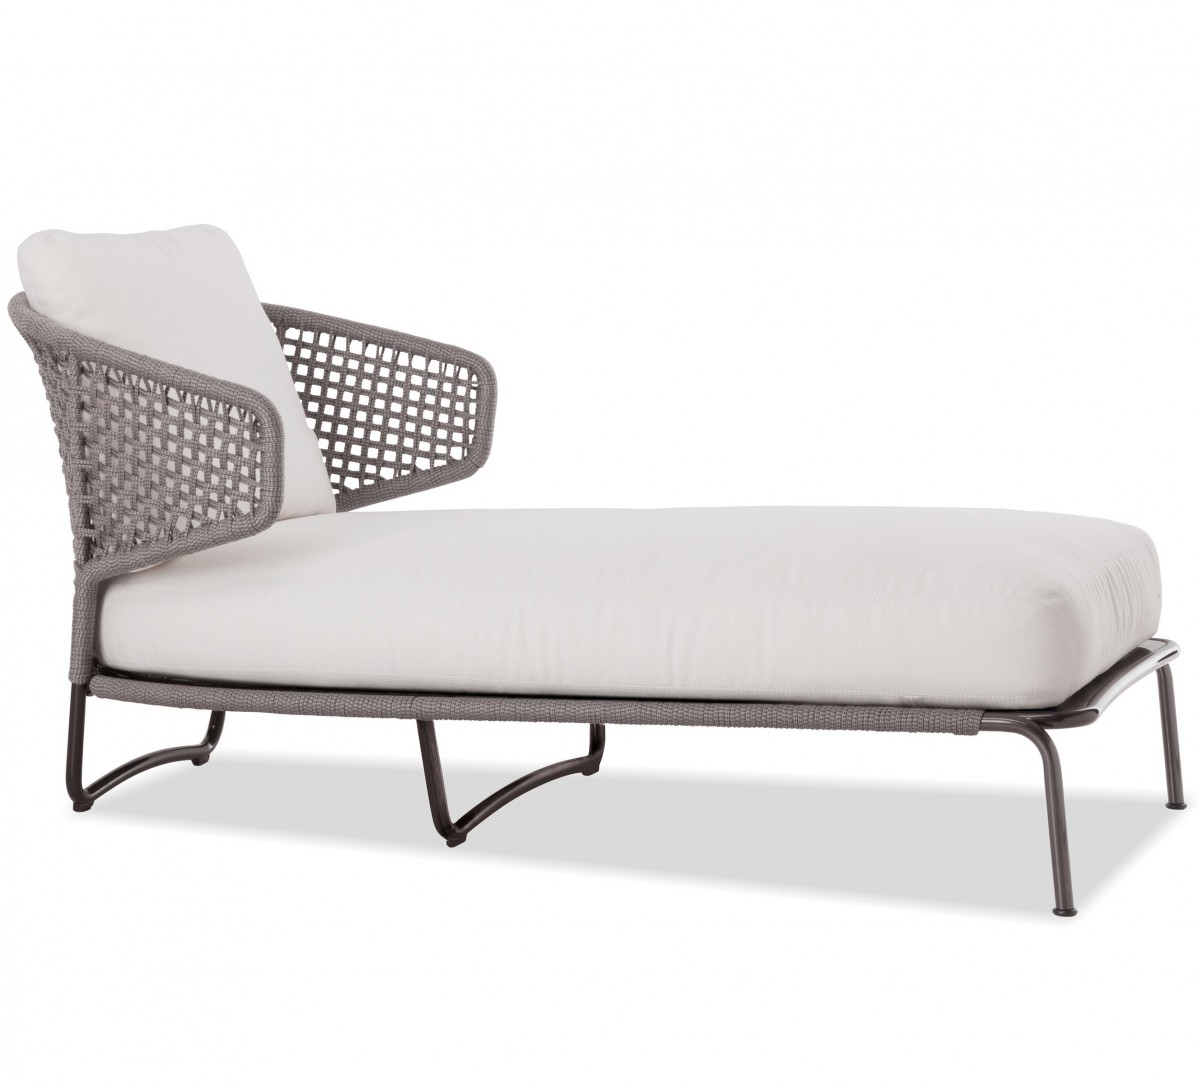 Aston Cord Outdoor Chaise-Longue